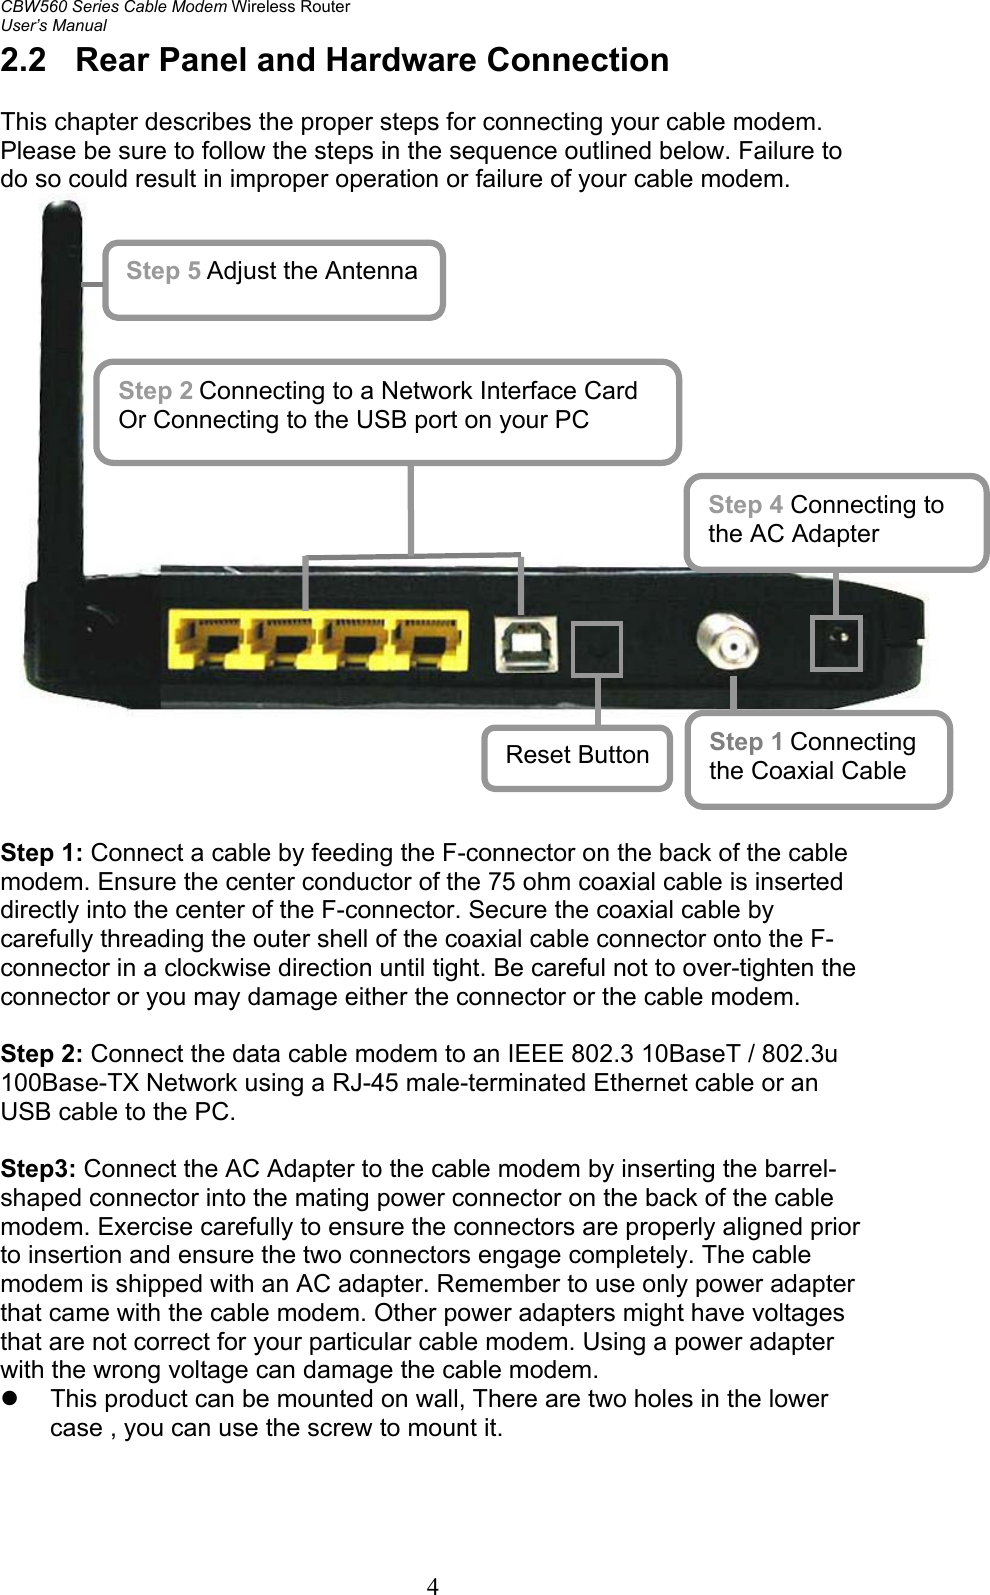 CBW560 Series Cable Modem Wireless Router User’s Manual 4 2.2  Rear Panel and Hardware Connection  This chapter describes the proper steps for connecting your cable modem. Please be sure to follow the steps in the sequence outlined below. Failure to do so could result in improper operation or failure of your cable modem.      Step 1: Connect a cable by feeding the F-connector on the back of the cable modem. Ensure the center conductor of the 75 ohm coaxial cable is inserted directly into the center of the F-connector. Secure the coaxial cable by carefully threading the outer shell of the coaxial cable connector onto the F-connector in a clockwise direction until tight. Be careful not to over-tighten the connector or you may damage either the connector or the cable modem.  Step 2: Connect the data cable modem to an IEEE 802.3 10BaseT / 802.3u 100Base-TX Network using a RJ-45 male-terminated Ethernet cable or an USB cable to the PC.  Step3: Connect the AC Adapter to the cable modem by inserting the barrel-shaped connector into the mating power connector on the back of the cable modem. Exercise carefully to ensure the connectors are properly aligned prior to insertion and ensure the two connectors engage completely. The cable modem is shipped with an AC adapter. Remember to use only power adapter that came with the cable modem. Other power adapters might have voltages that are not correct for your particular cable modem. Using a power adapter with the wrong voltage can damage the cable modem.   z  This product can be mounted on wall, There are two holes in the lower case , you can use the screw to mount it.  Step 5 Adjust the Antenna Step 2 Connecting to a Network Interface Card Or Connecting to the USB port on your PC Step 1 Connecting the Coaxial Cable Step 4 Connecting to the AC Adapter Reset Button